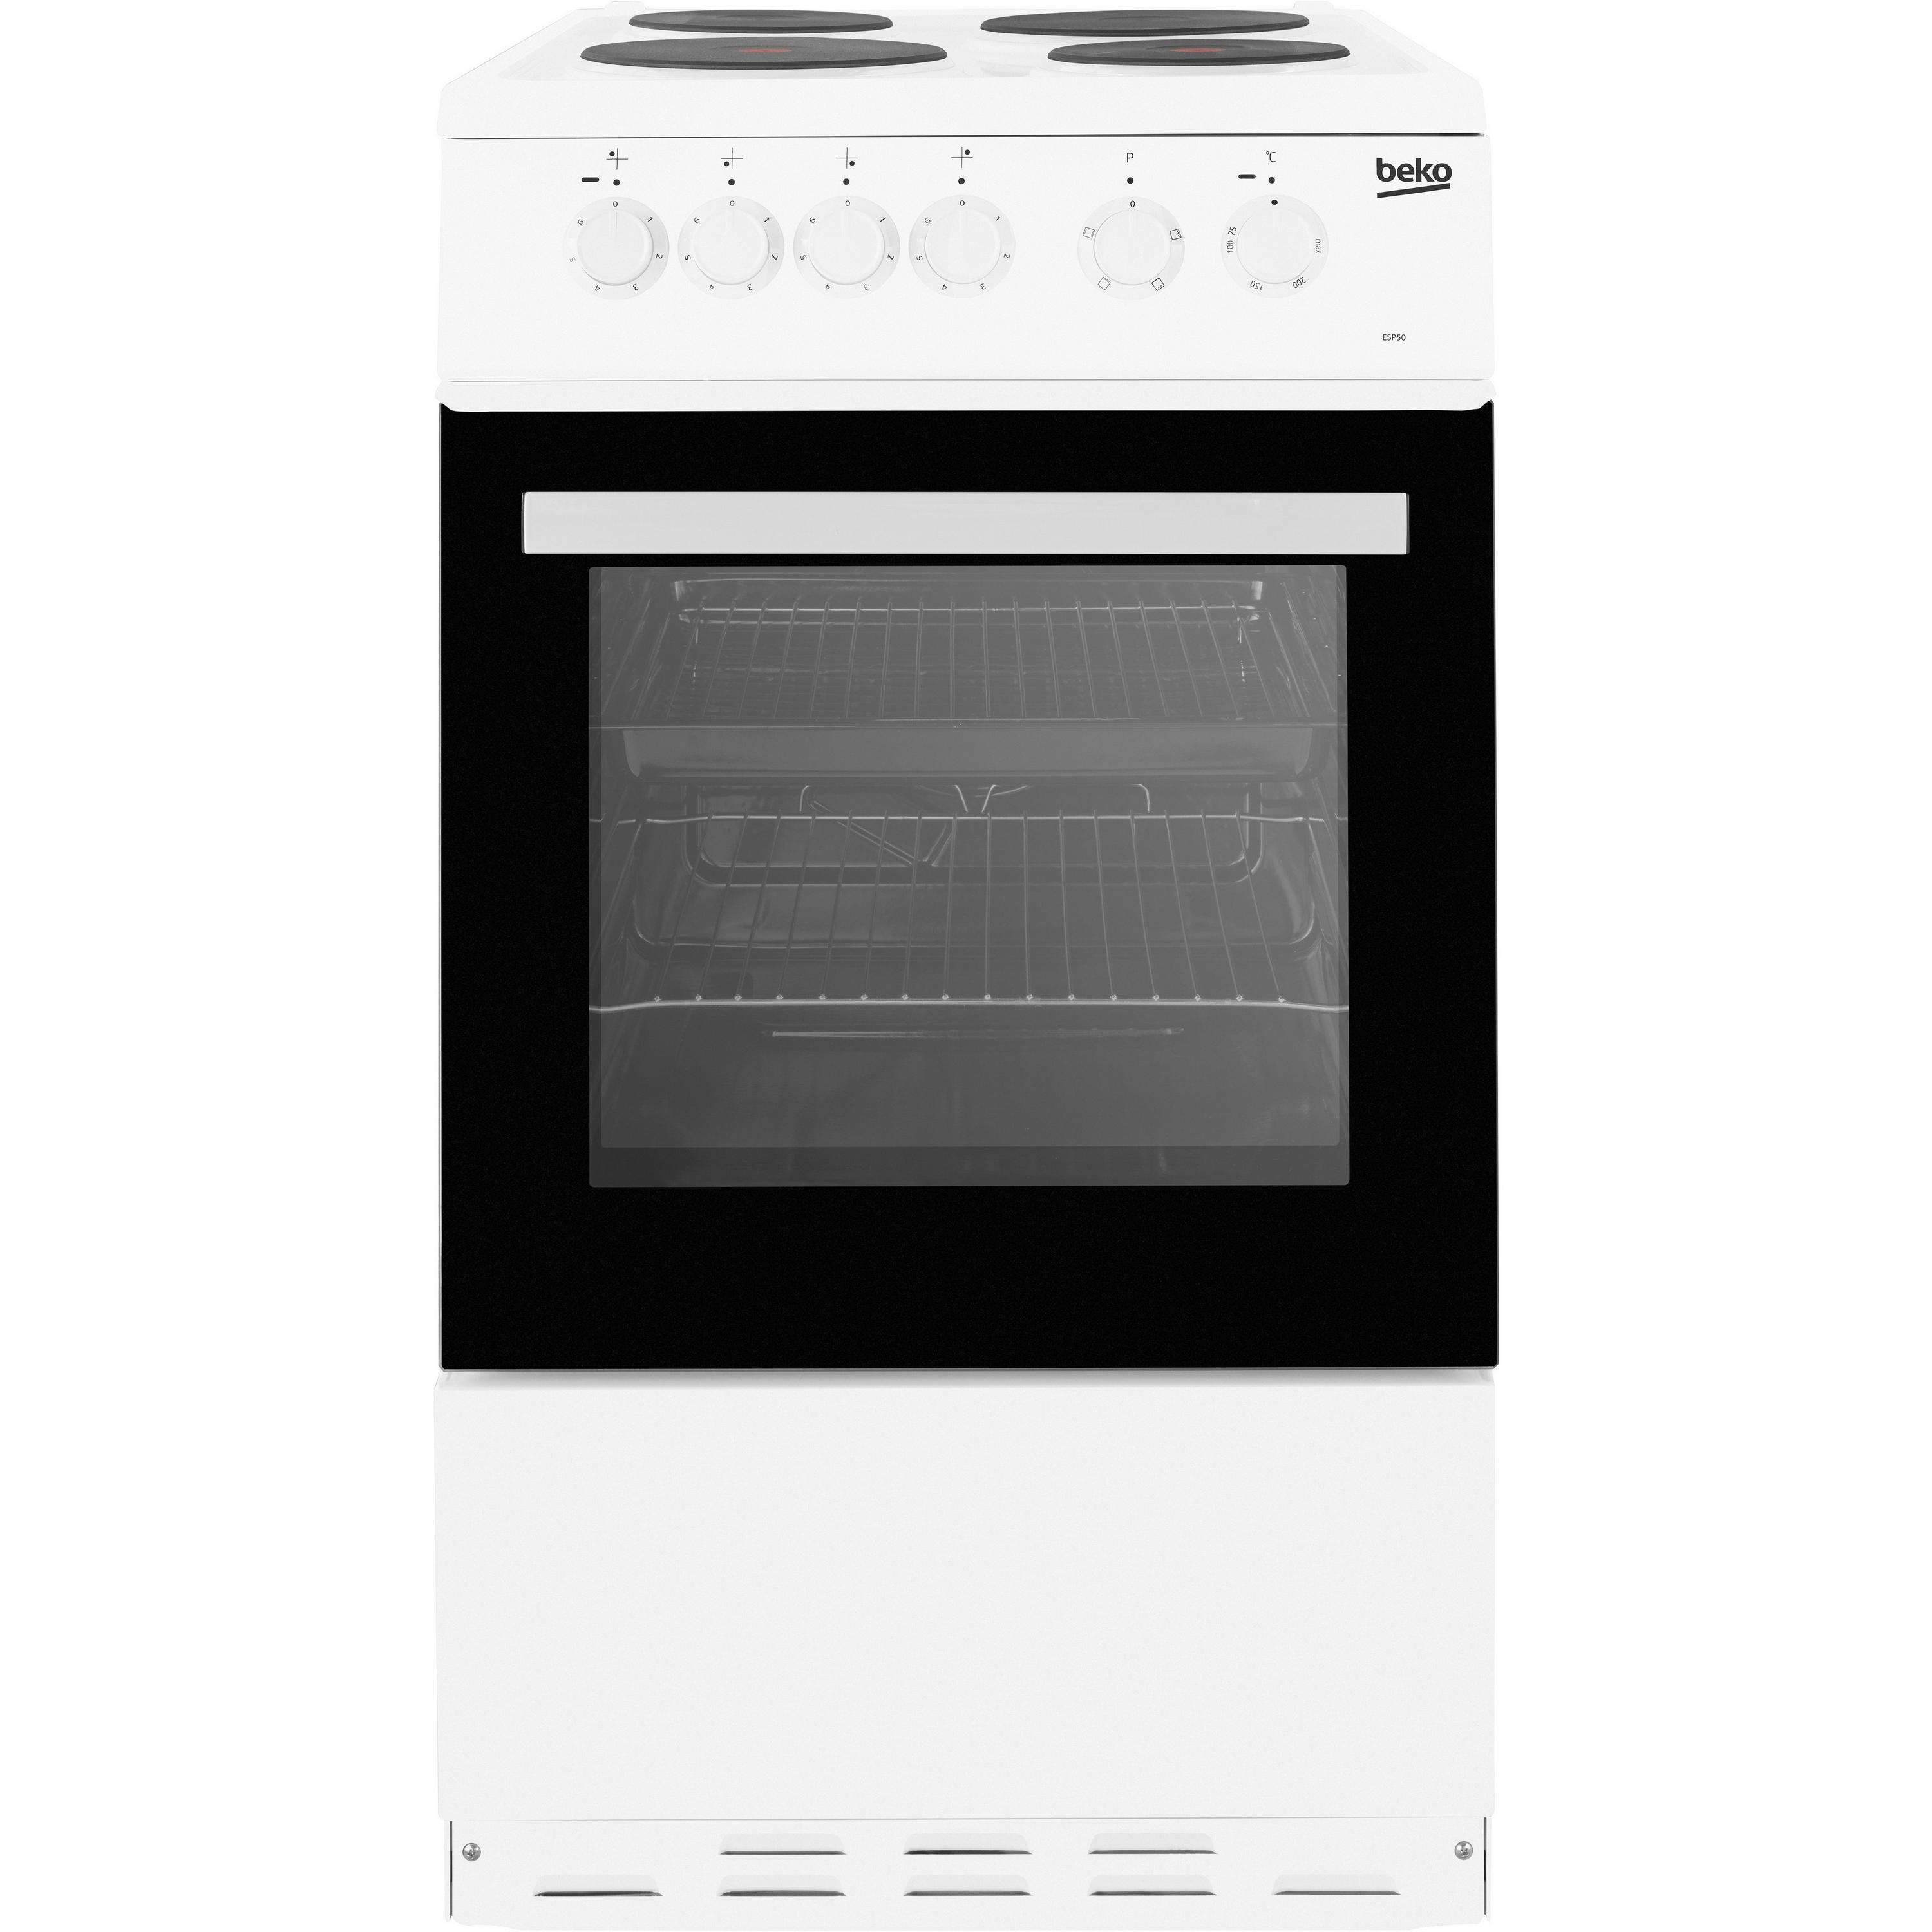 Beko ESP50W 50cm Single Oven Electric Cooker in White Solid Plate